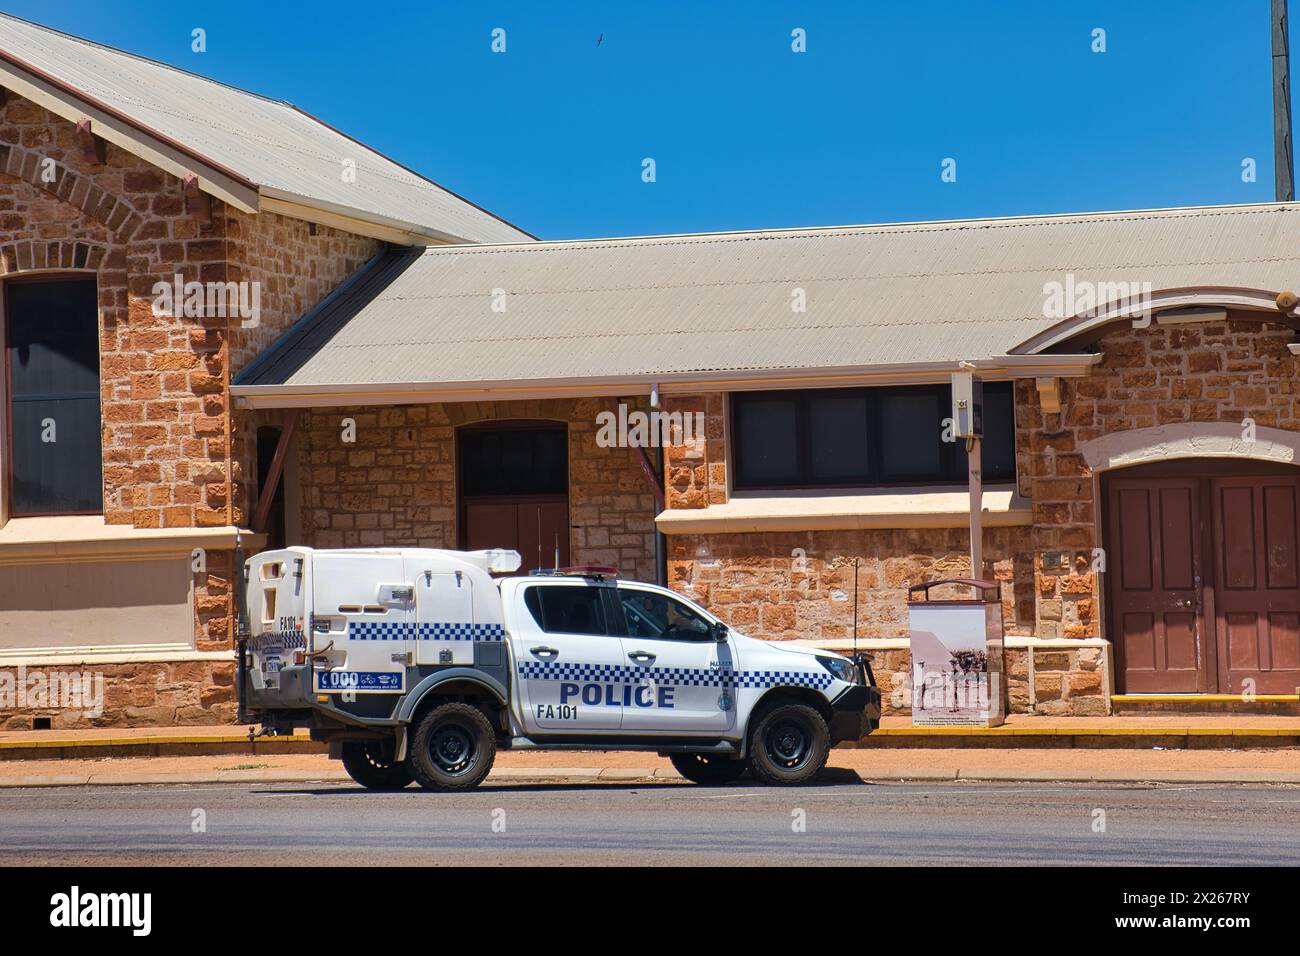 Police car of the Western Australian police in front of a heritage building in the remote outback town of Cue Stock Photo